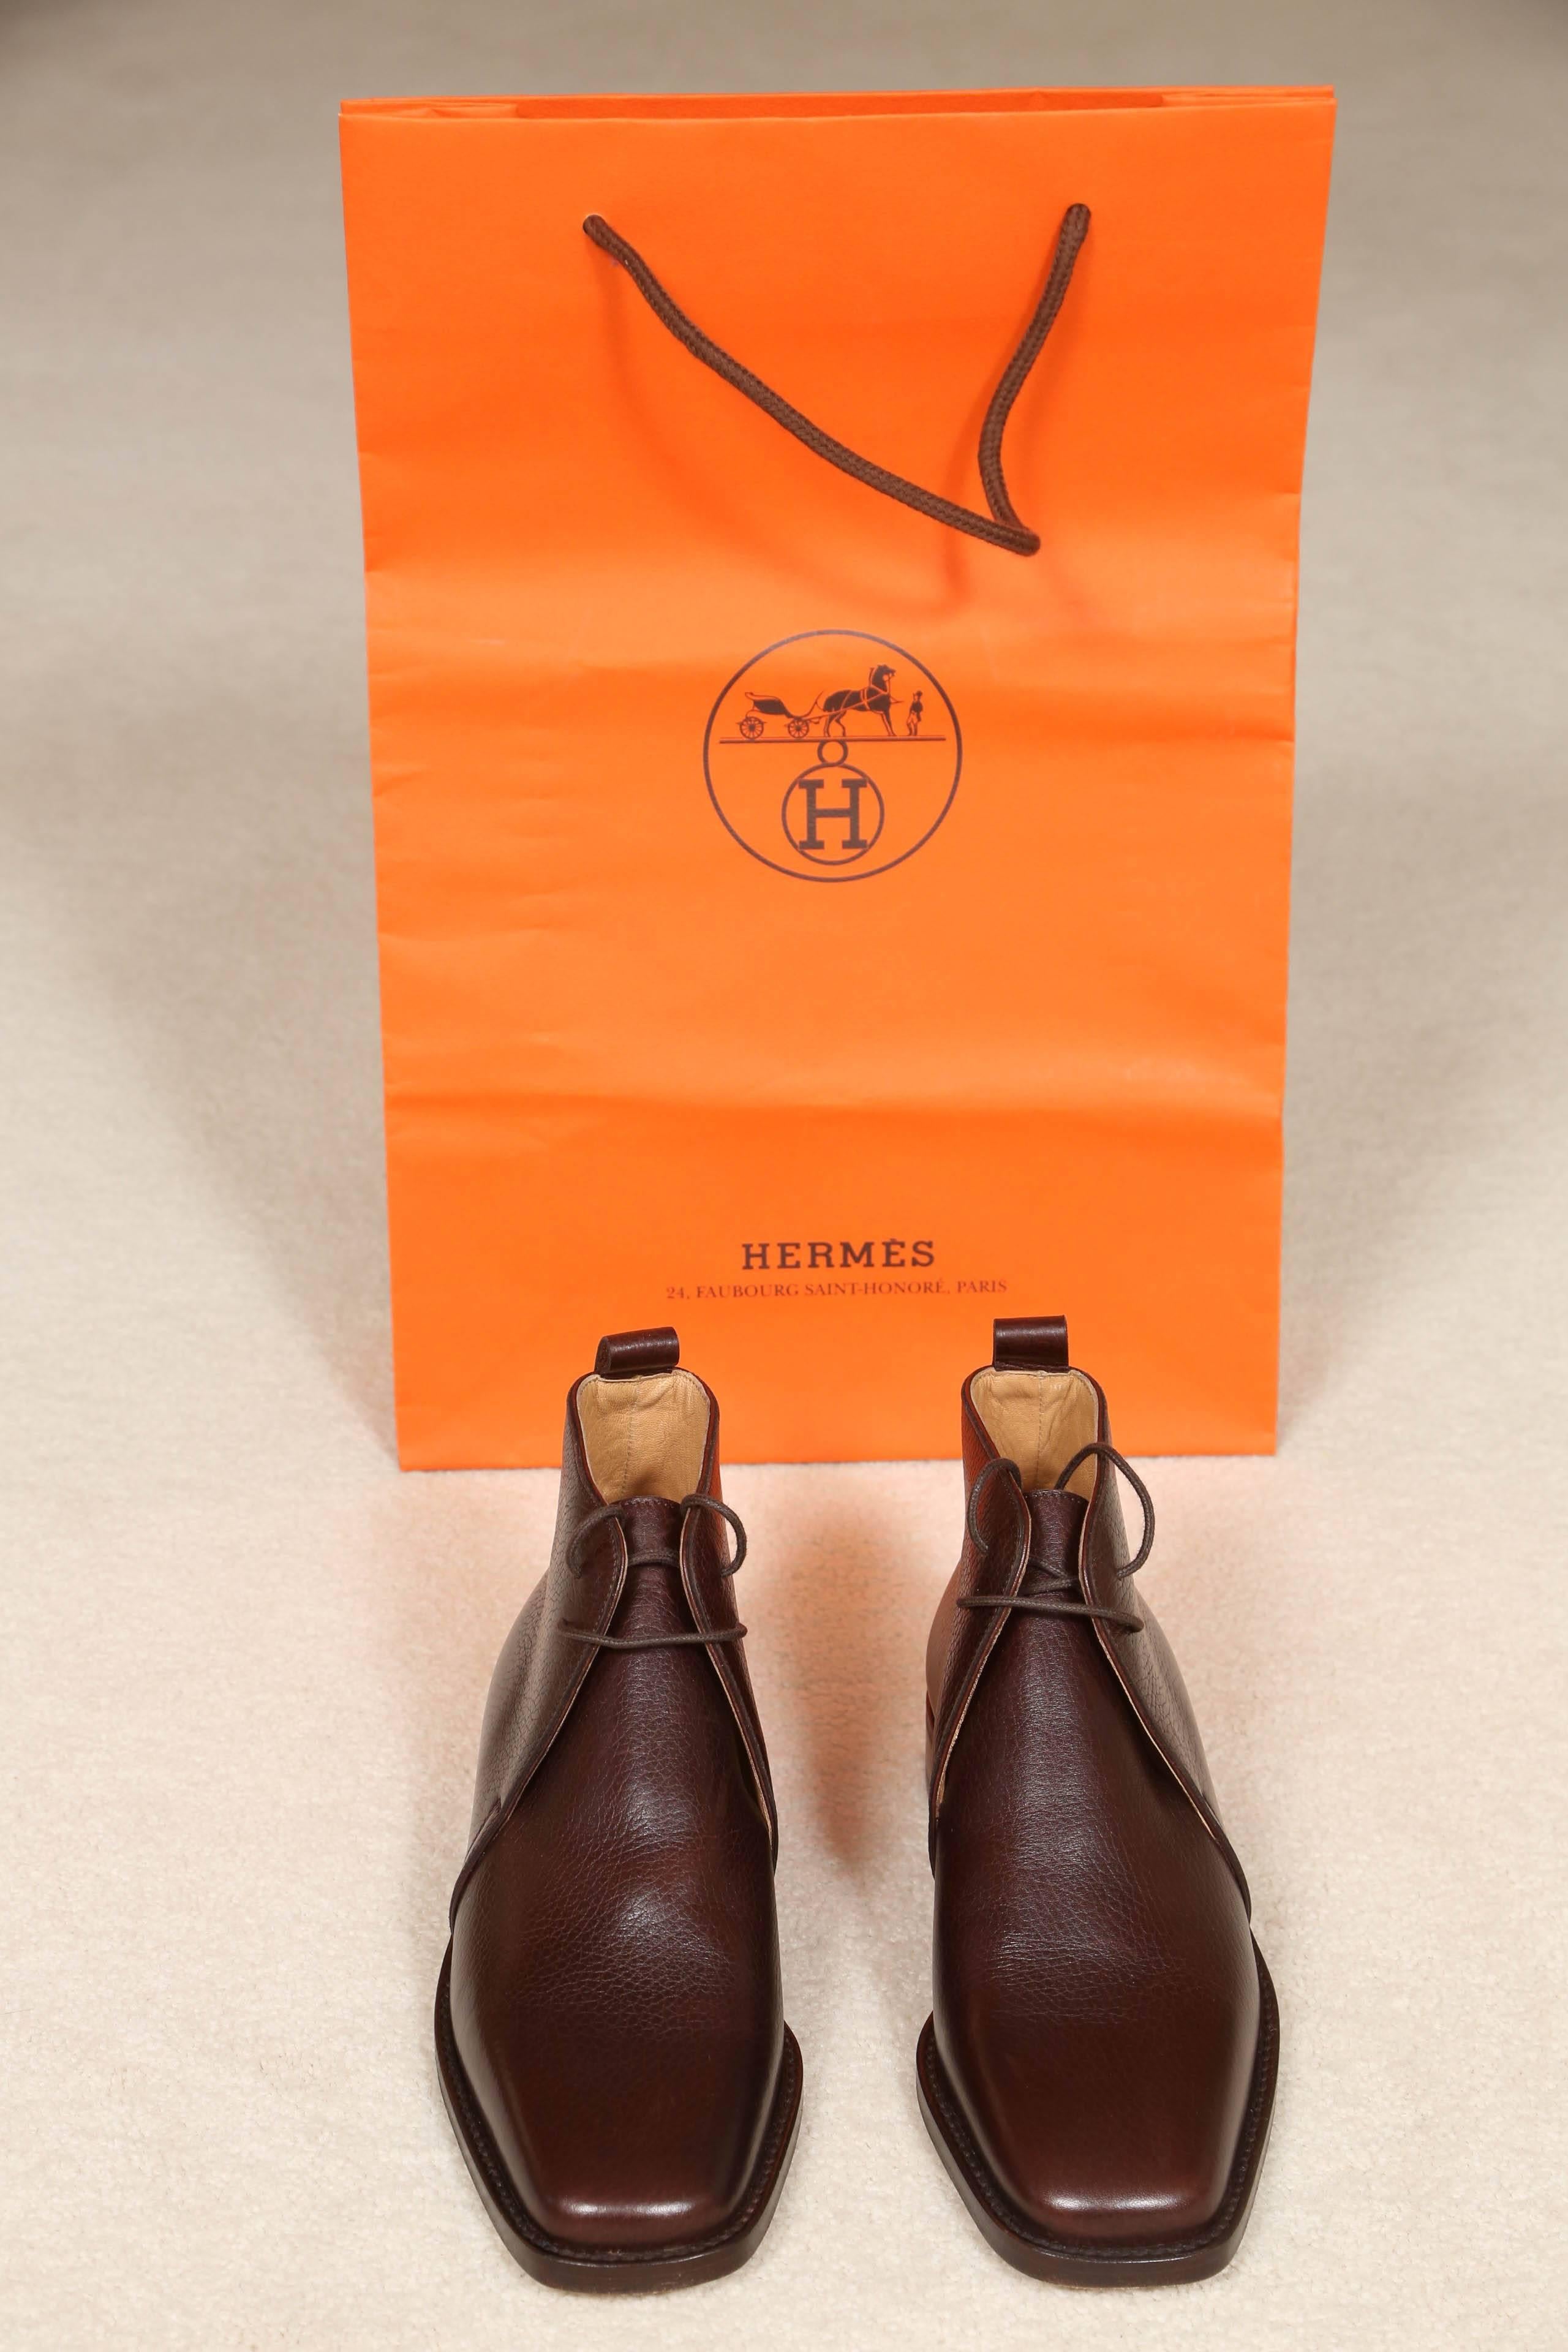 Hermes ladies low boot in brown calfskin boots, European size 36 1/2
Very nice new with box, dusters, box and bag.
Sold with original Hermes box packaging
Made in: Italy
Color: Brown
Composition: Graine lisse leather, Grain skin
Sole Stamp: Hermes